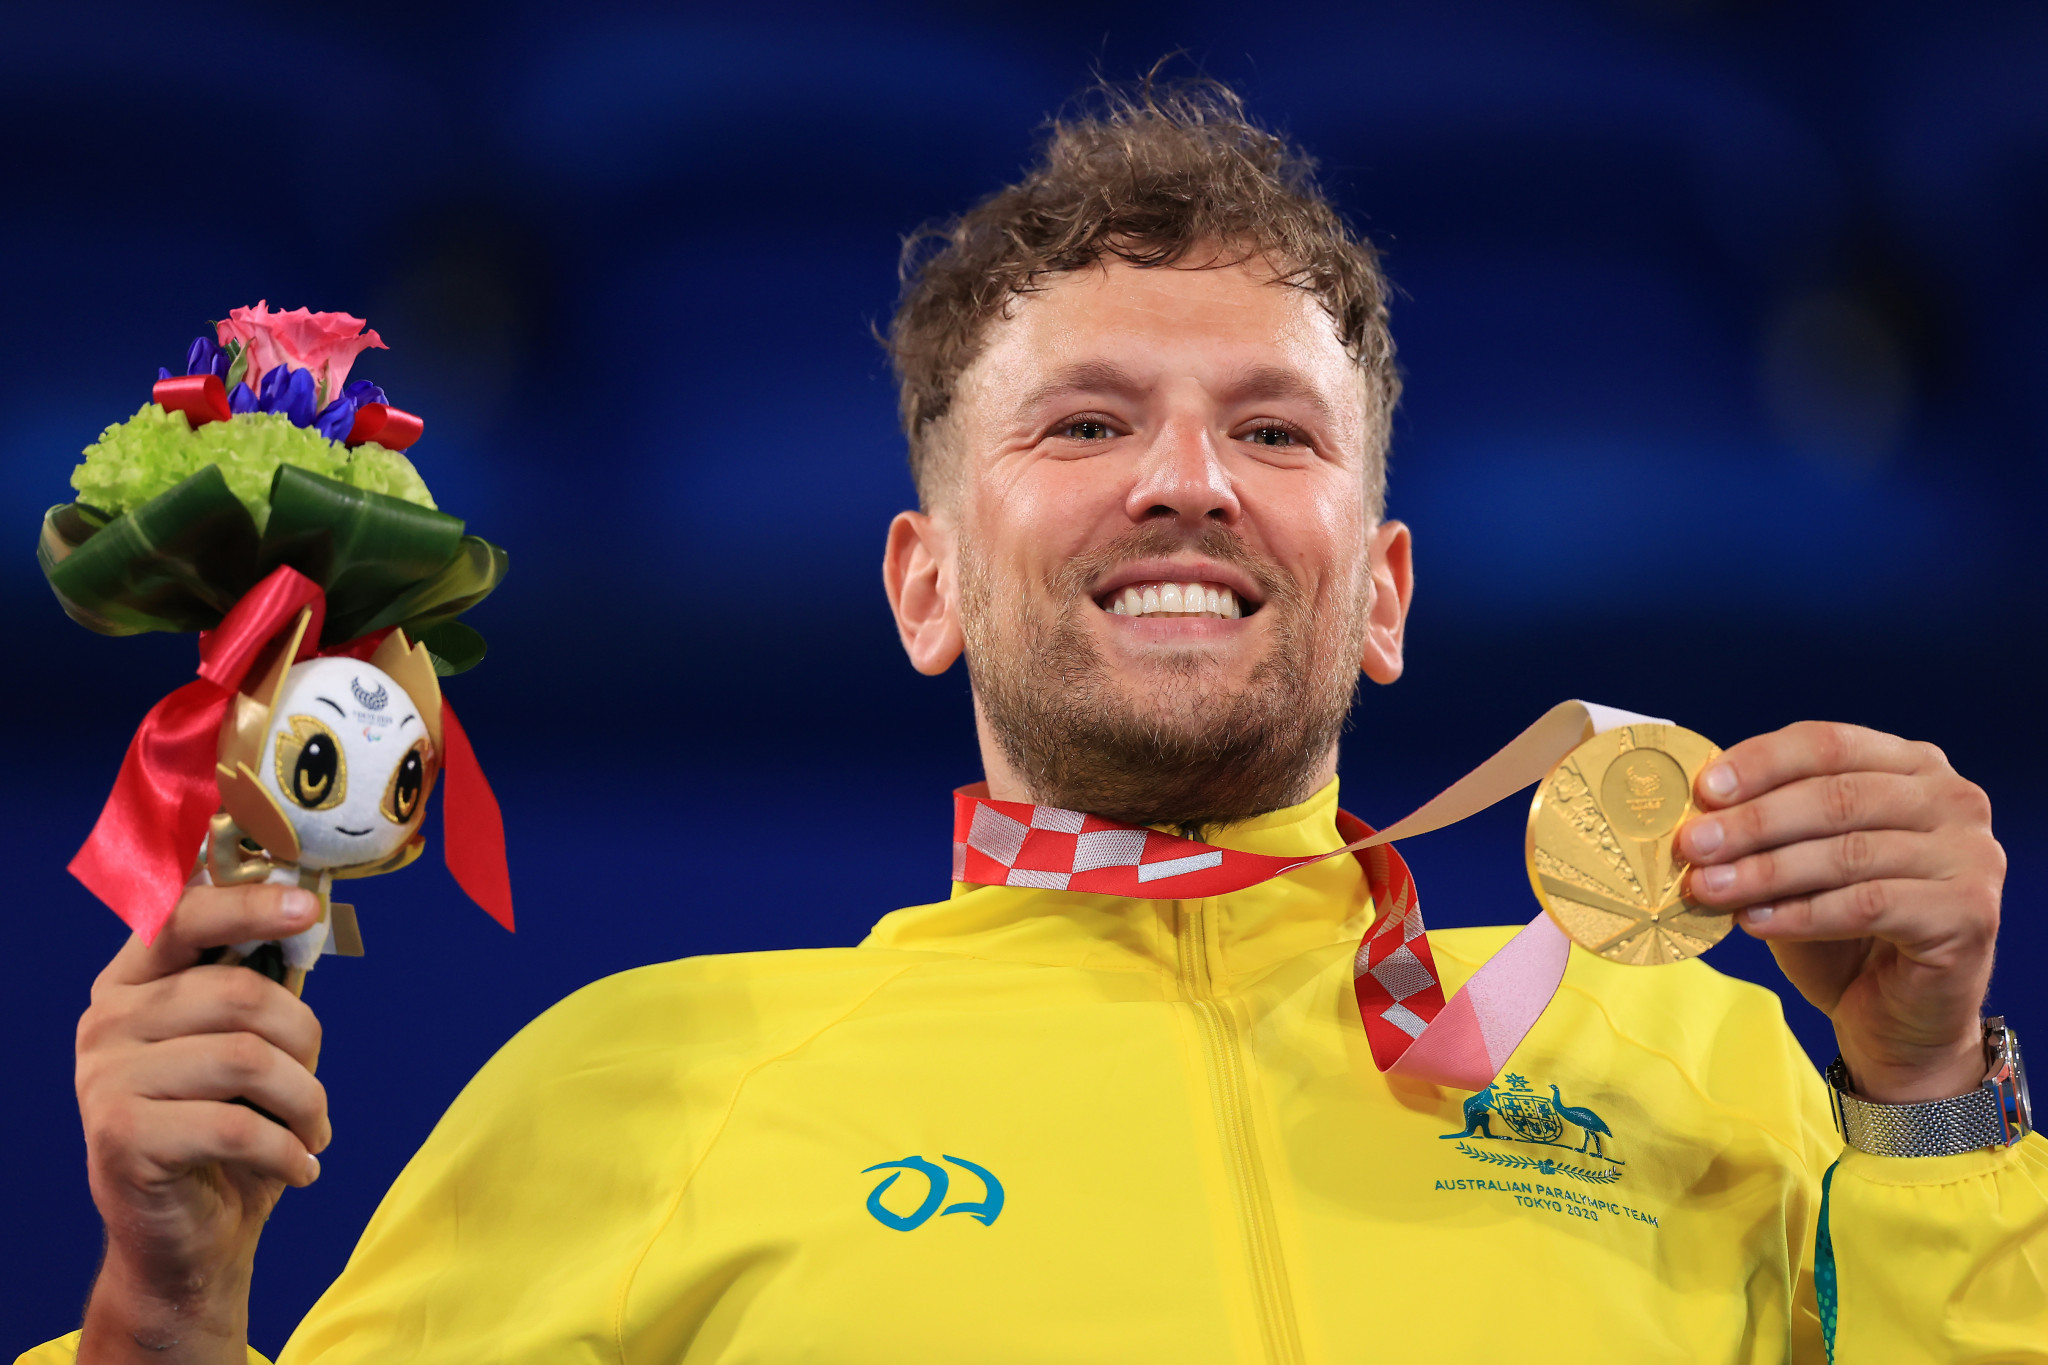 Three-time Paralympic gold medallist Dylan Alcott said "we've got to keep building" prize money at wheelchair tennis tournaments ©Getty Images